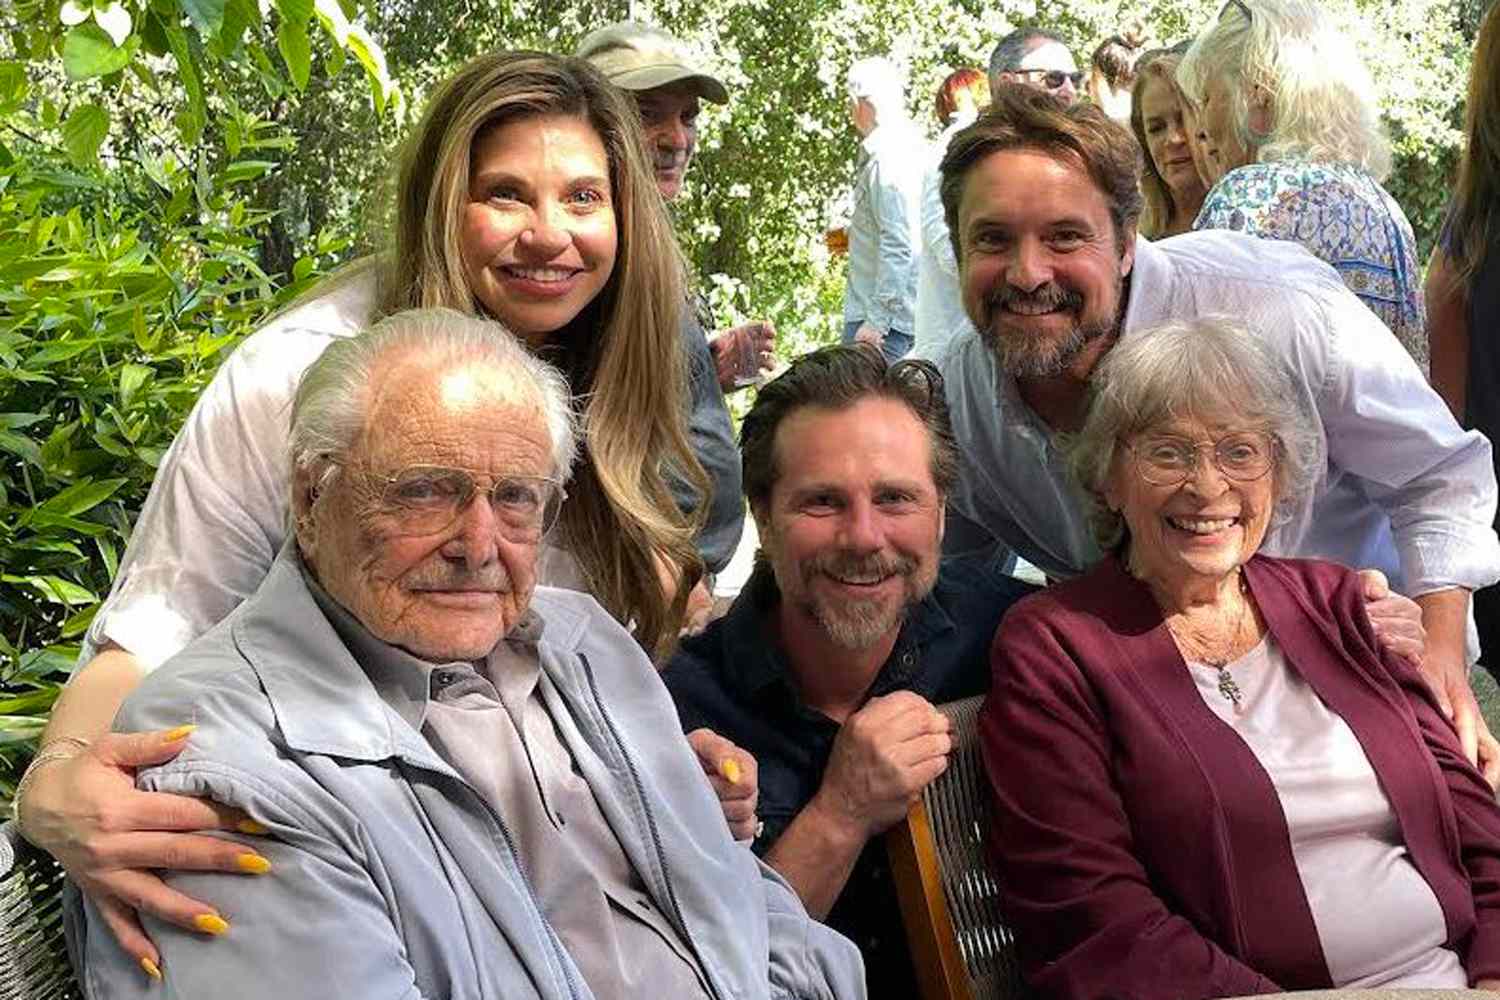 William Daniels Has a “Boy Meets World” Reunion with His 'Favorite Students' — See the Sweet Photo!